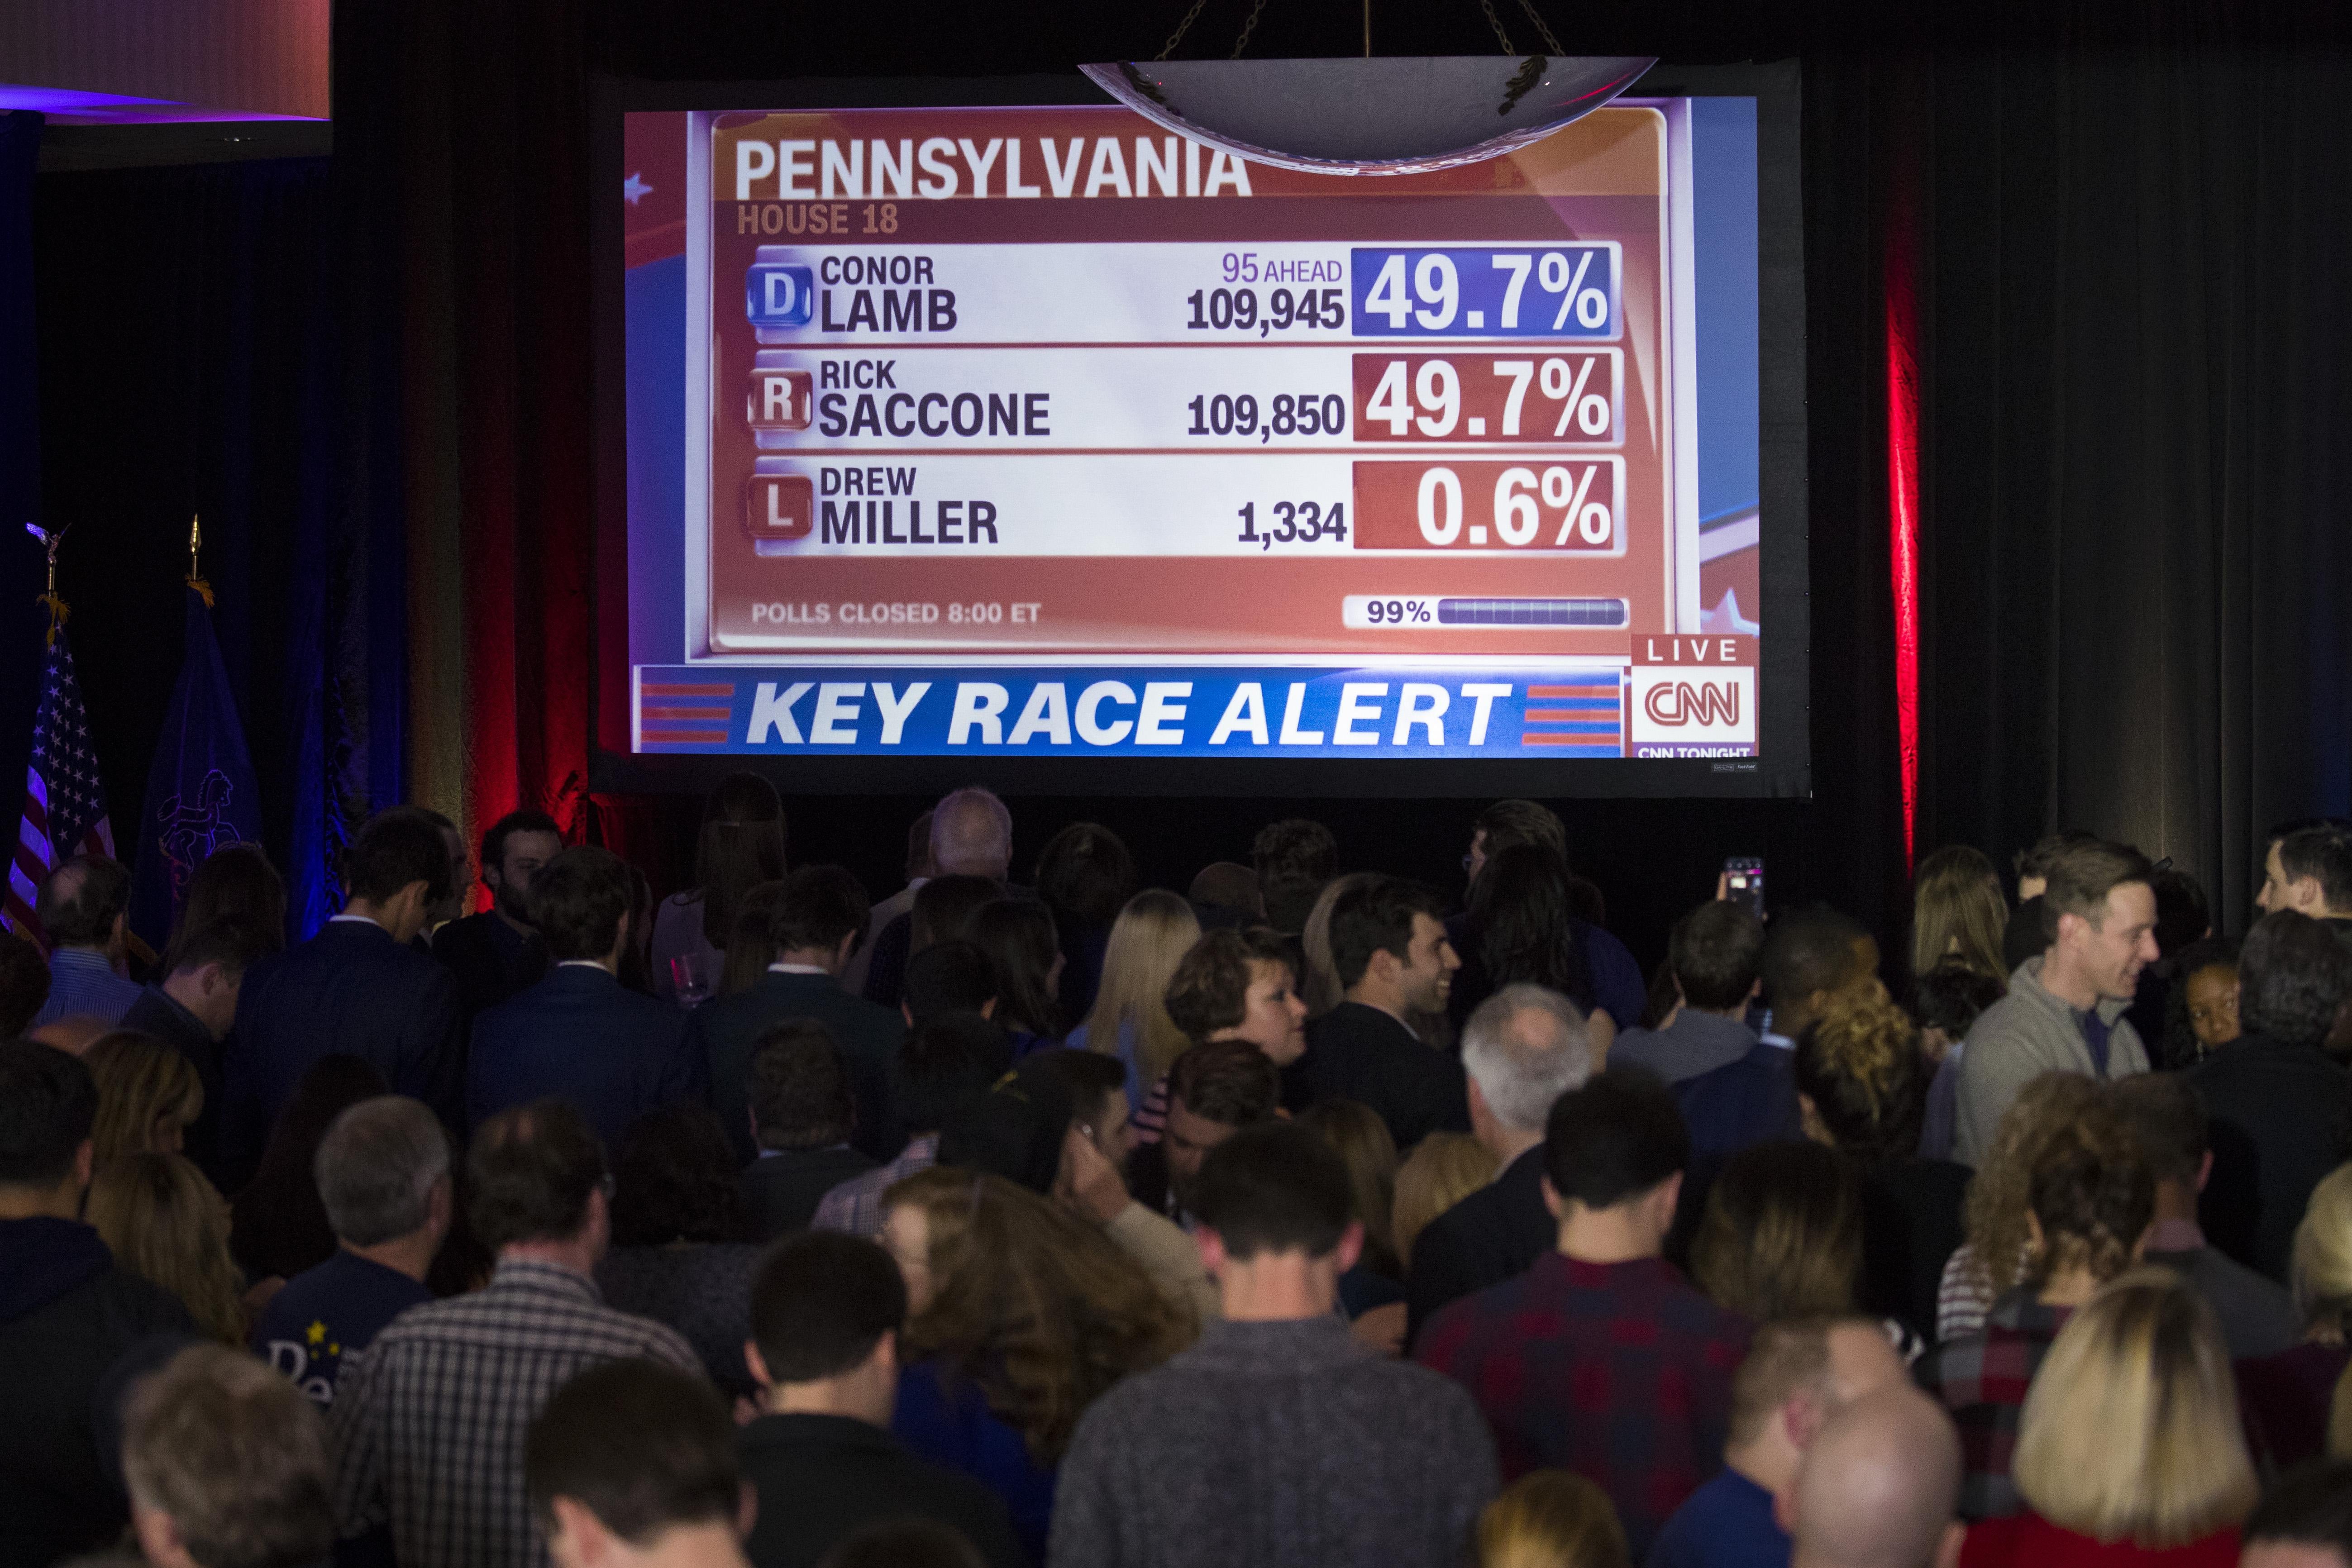 CANONSBURG, PA - MARCH 14: CNN is displayed on a monitor showing returns during at an election night event for Conor Lamb, Democratic congressional candidate for Pennsylvania's 18th district, March 14, 2018 in Canonsburg, Pennsylvania. Lamb claimed victory against Republican candidate Rick Saccone, but many news outlets report the race as too close to call. (Photo by Drew Angerer/Getty Images)